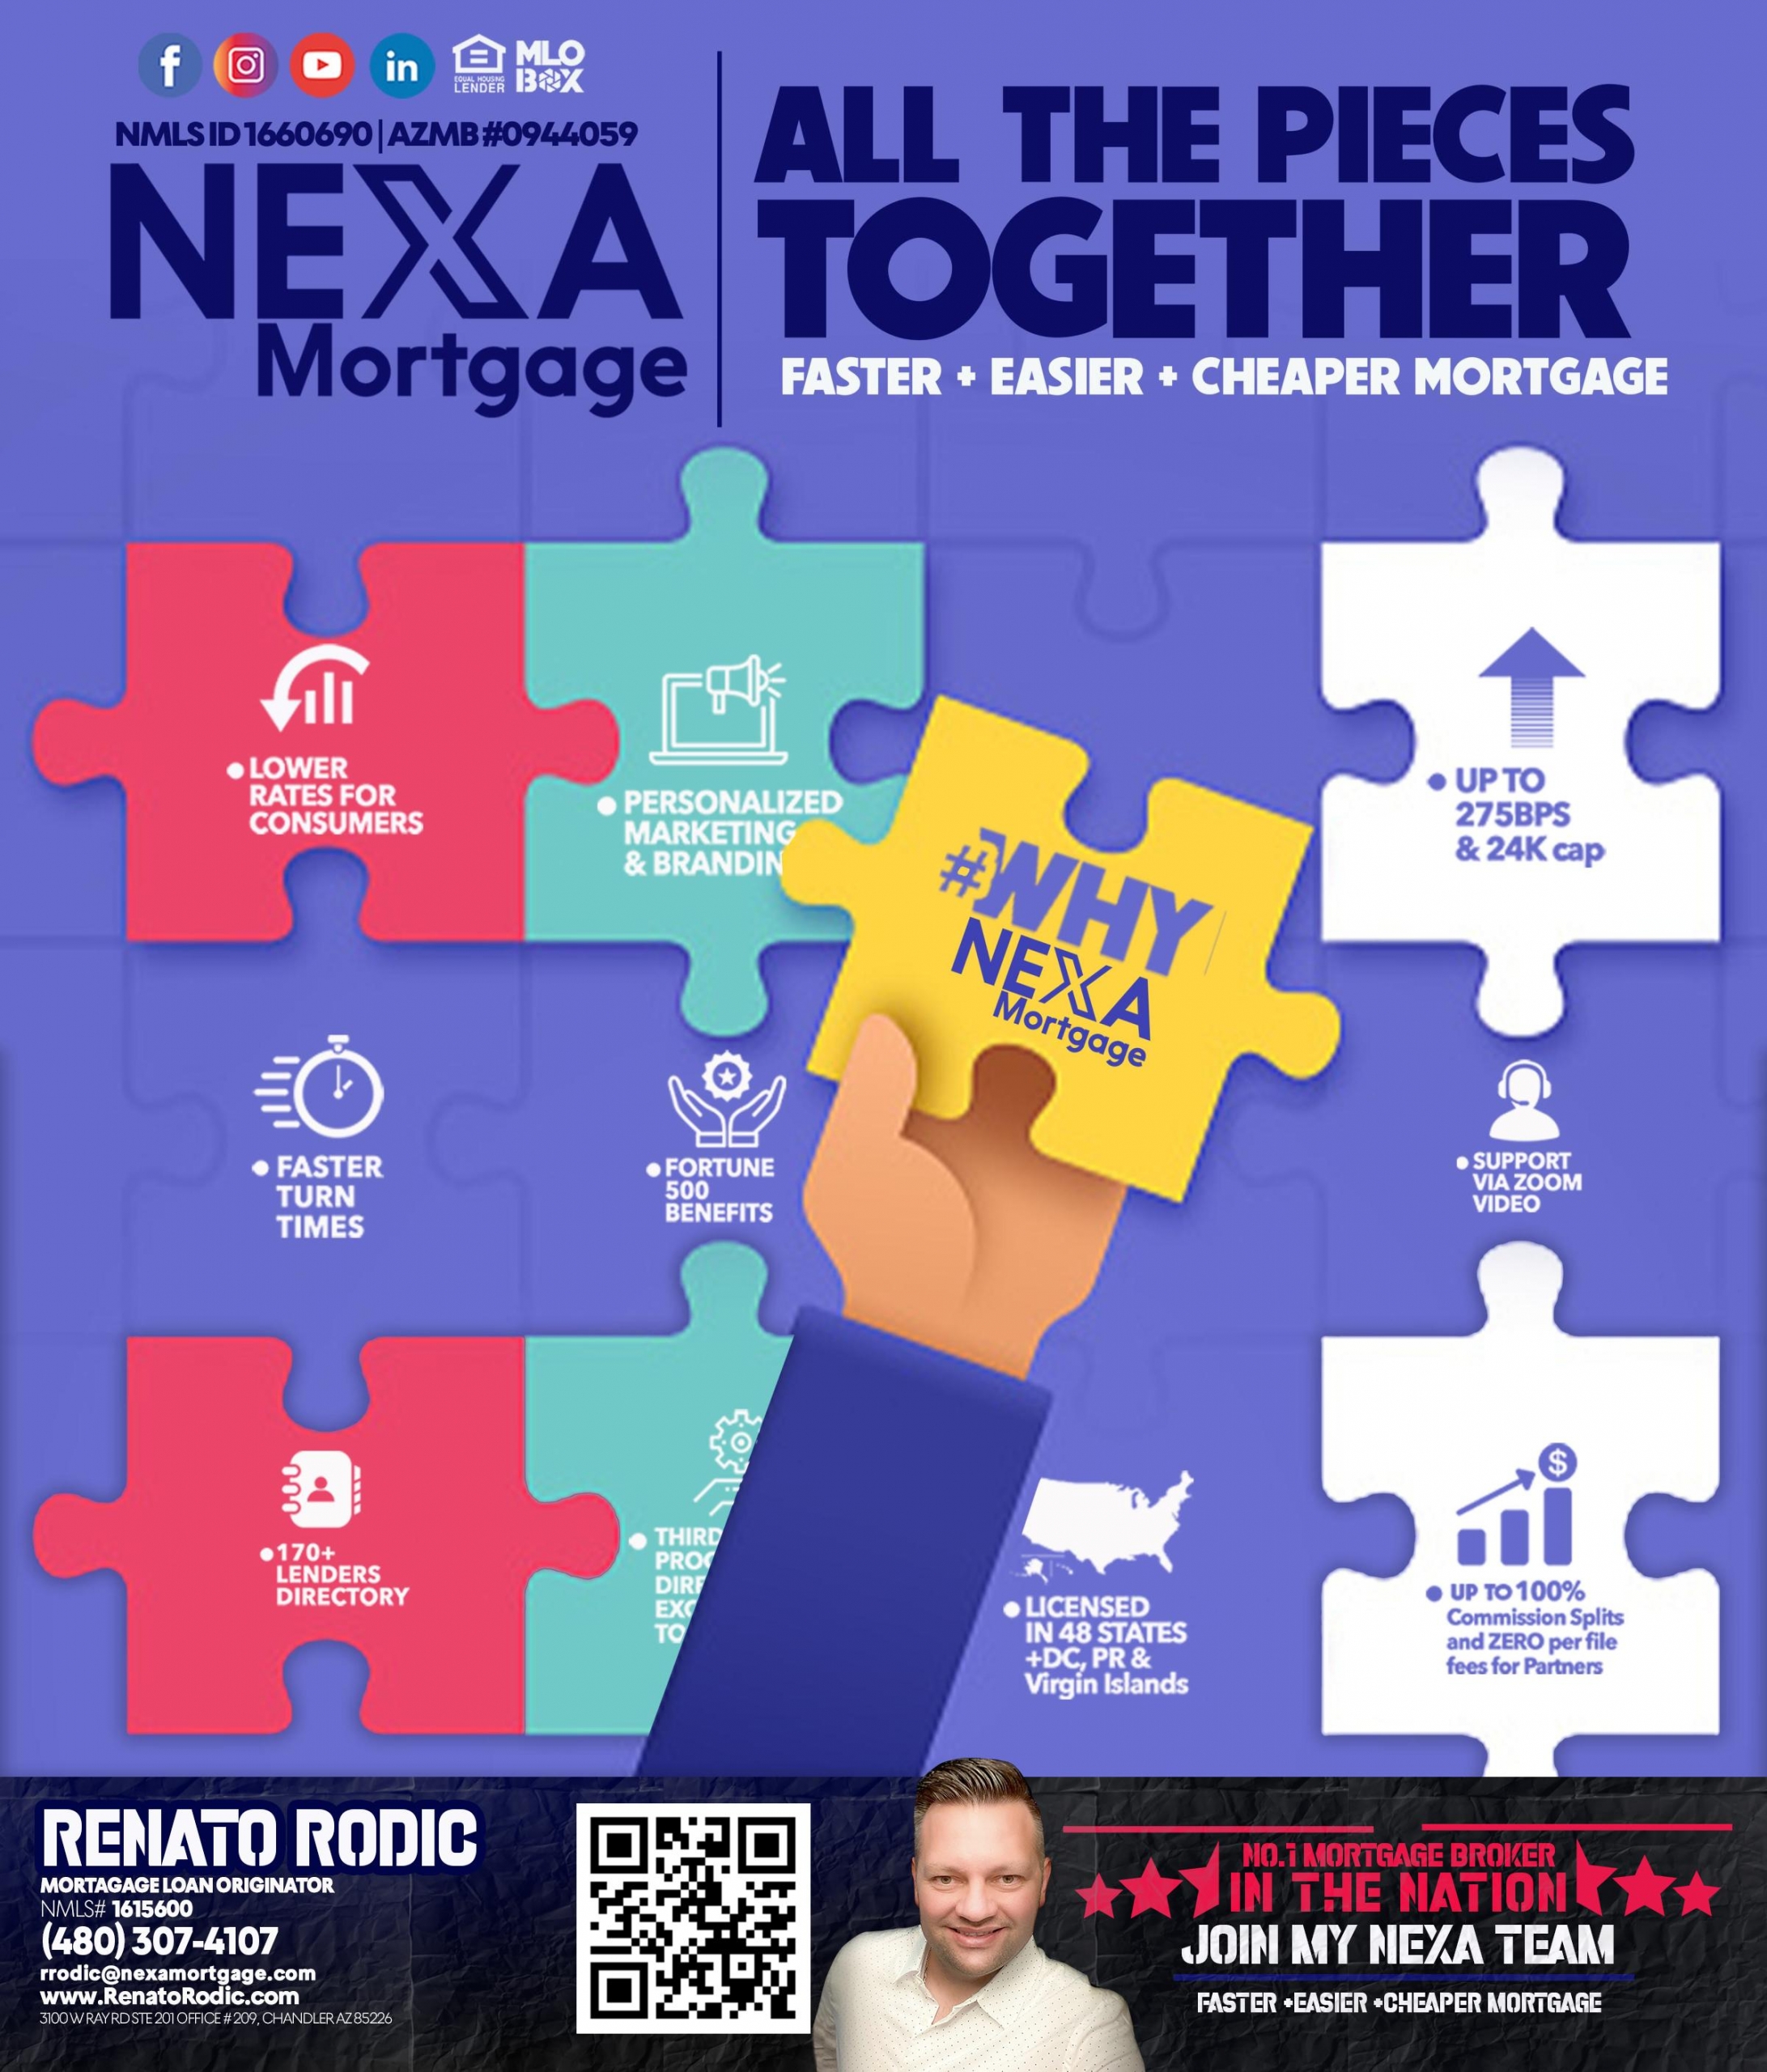 COME AND LEARN WHY THE PIECES OF THE PUZZLE FIT PERFECT AT NEXA MORTGAGE